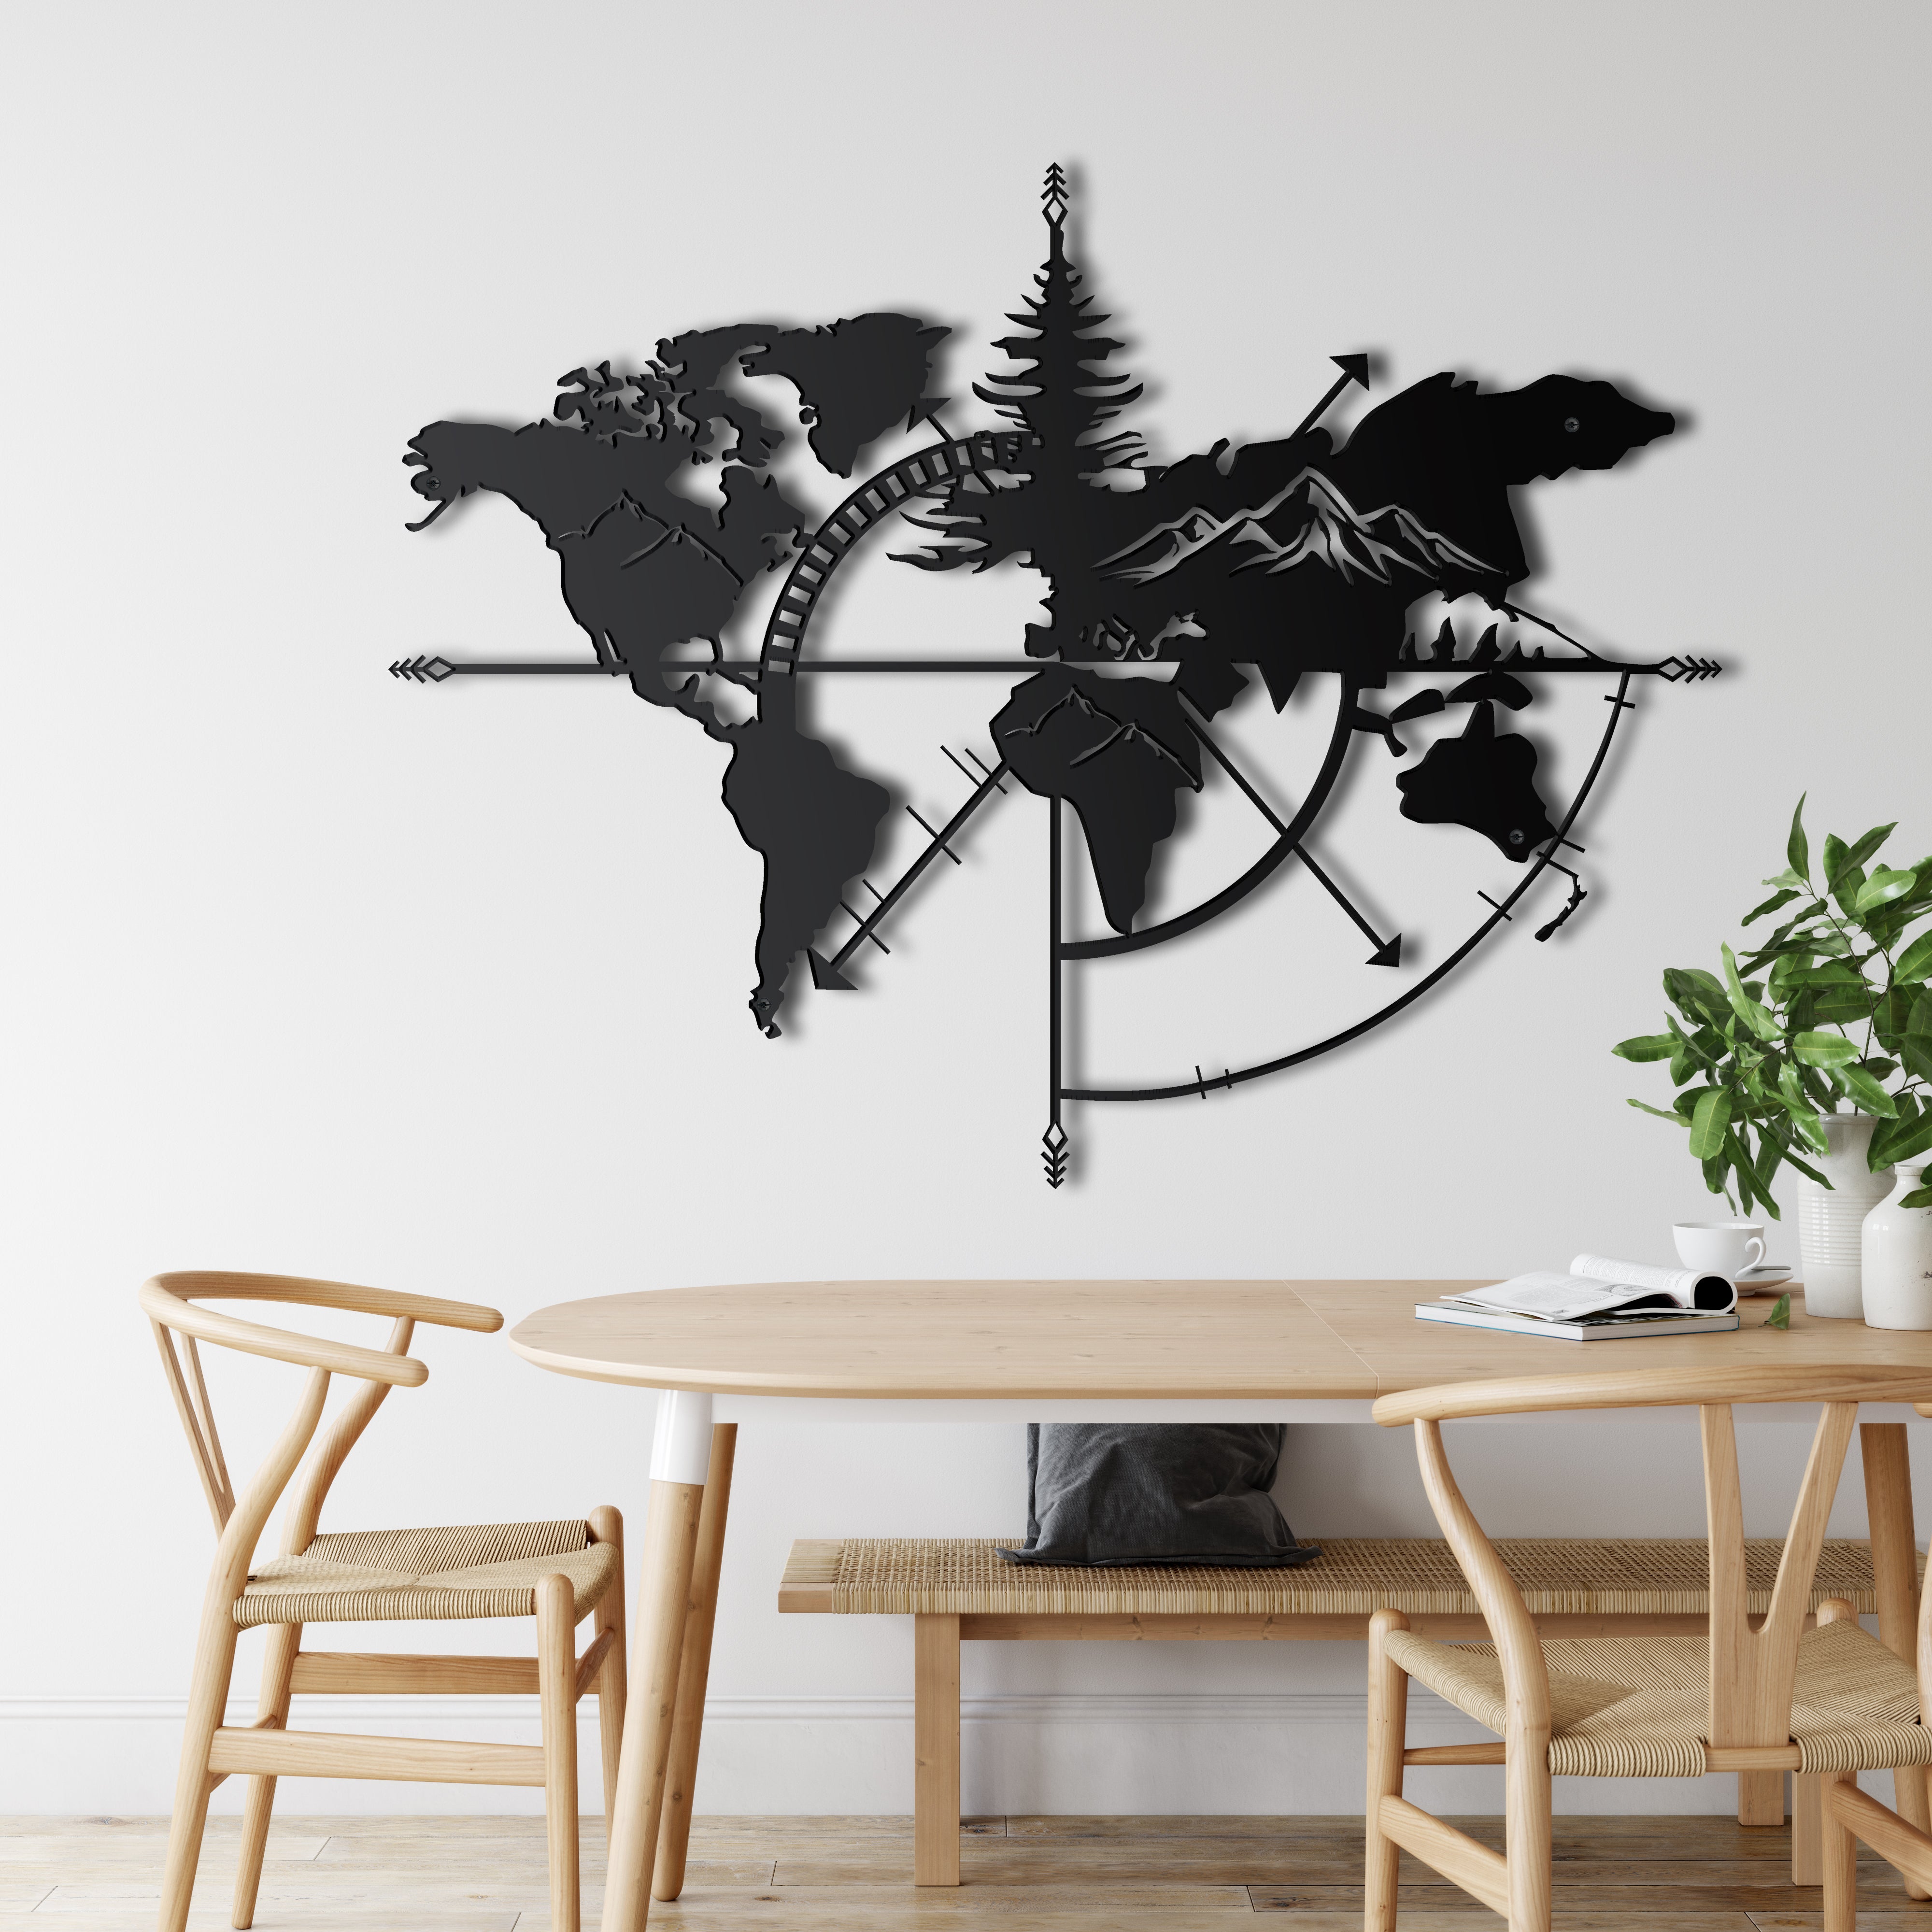 World Map Metal Wall Decor with Mountains